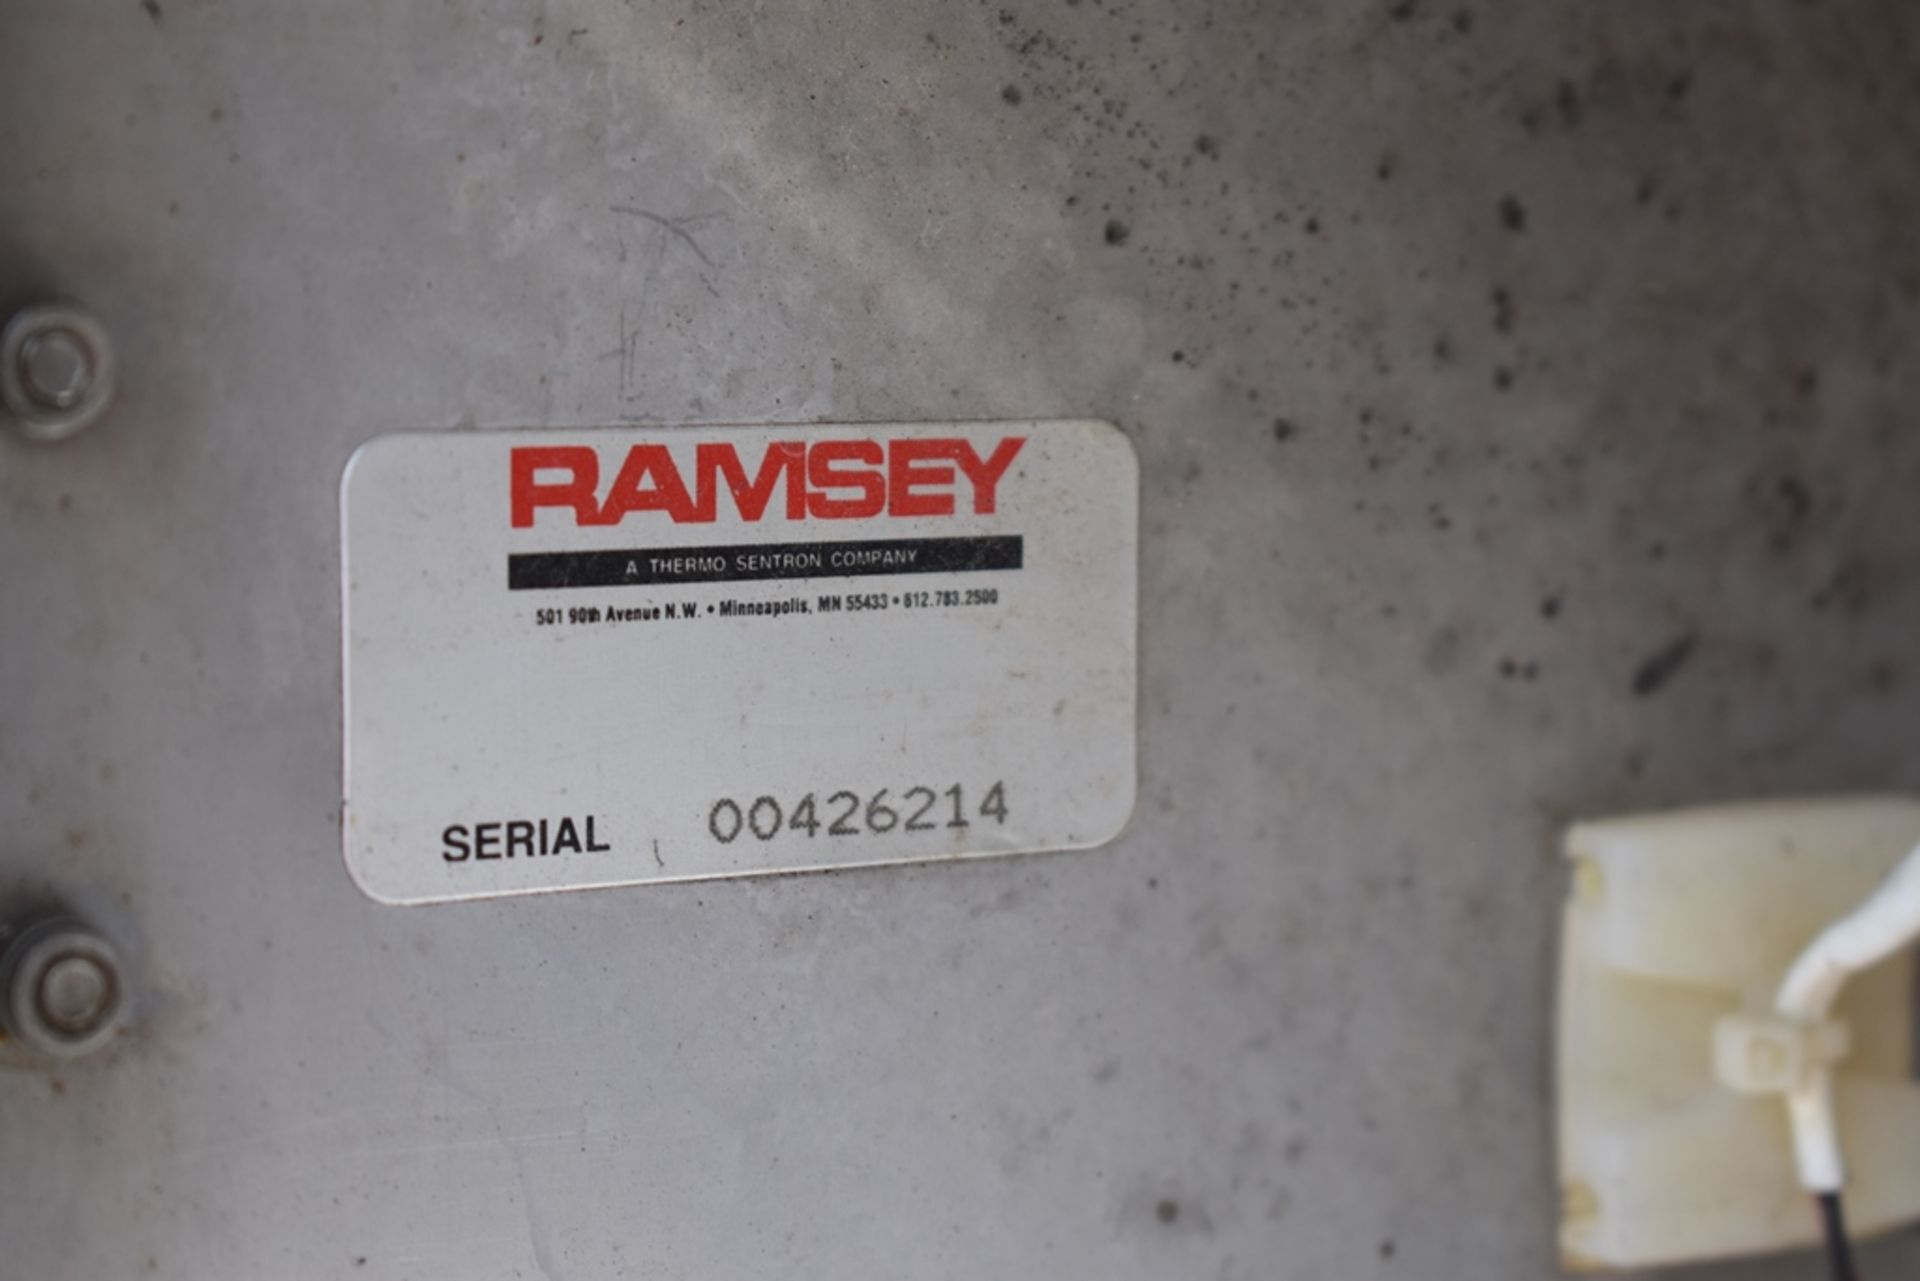 4 Ramsey Icore dynamic scales Mod. Autocheck 9000 plus and diverse merchandise. - Image 27 of 30